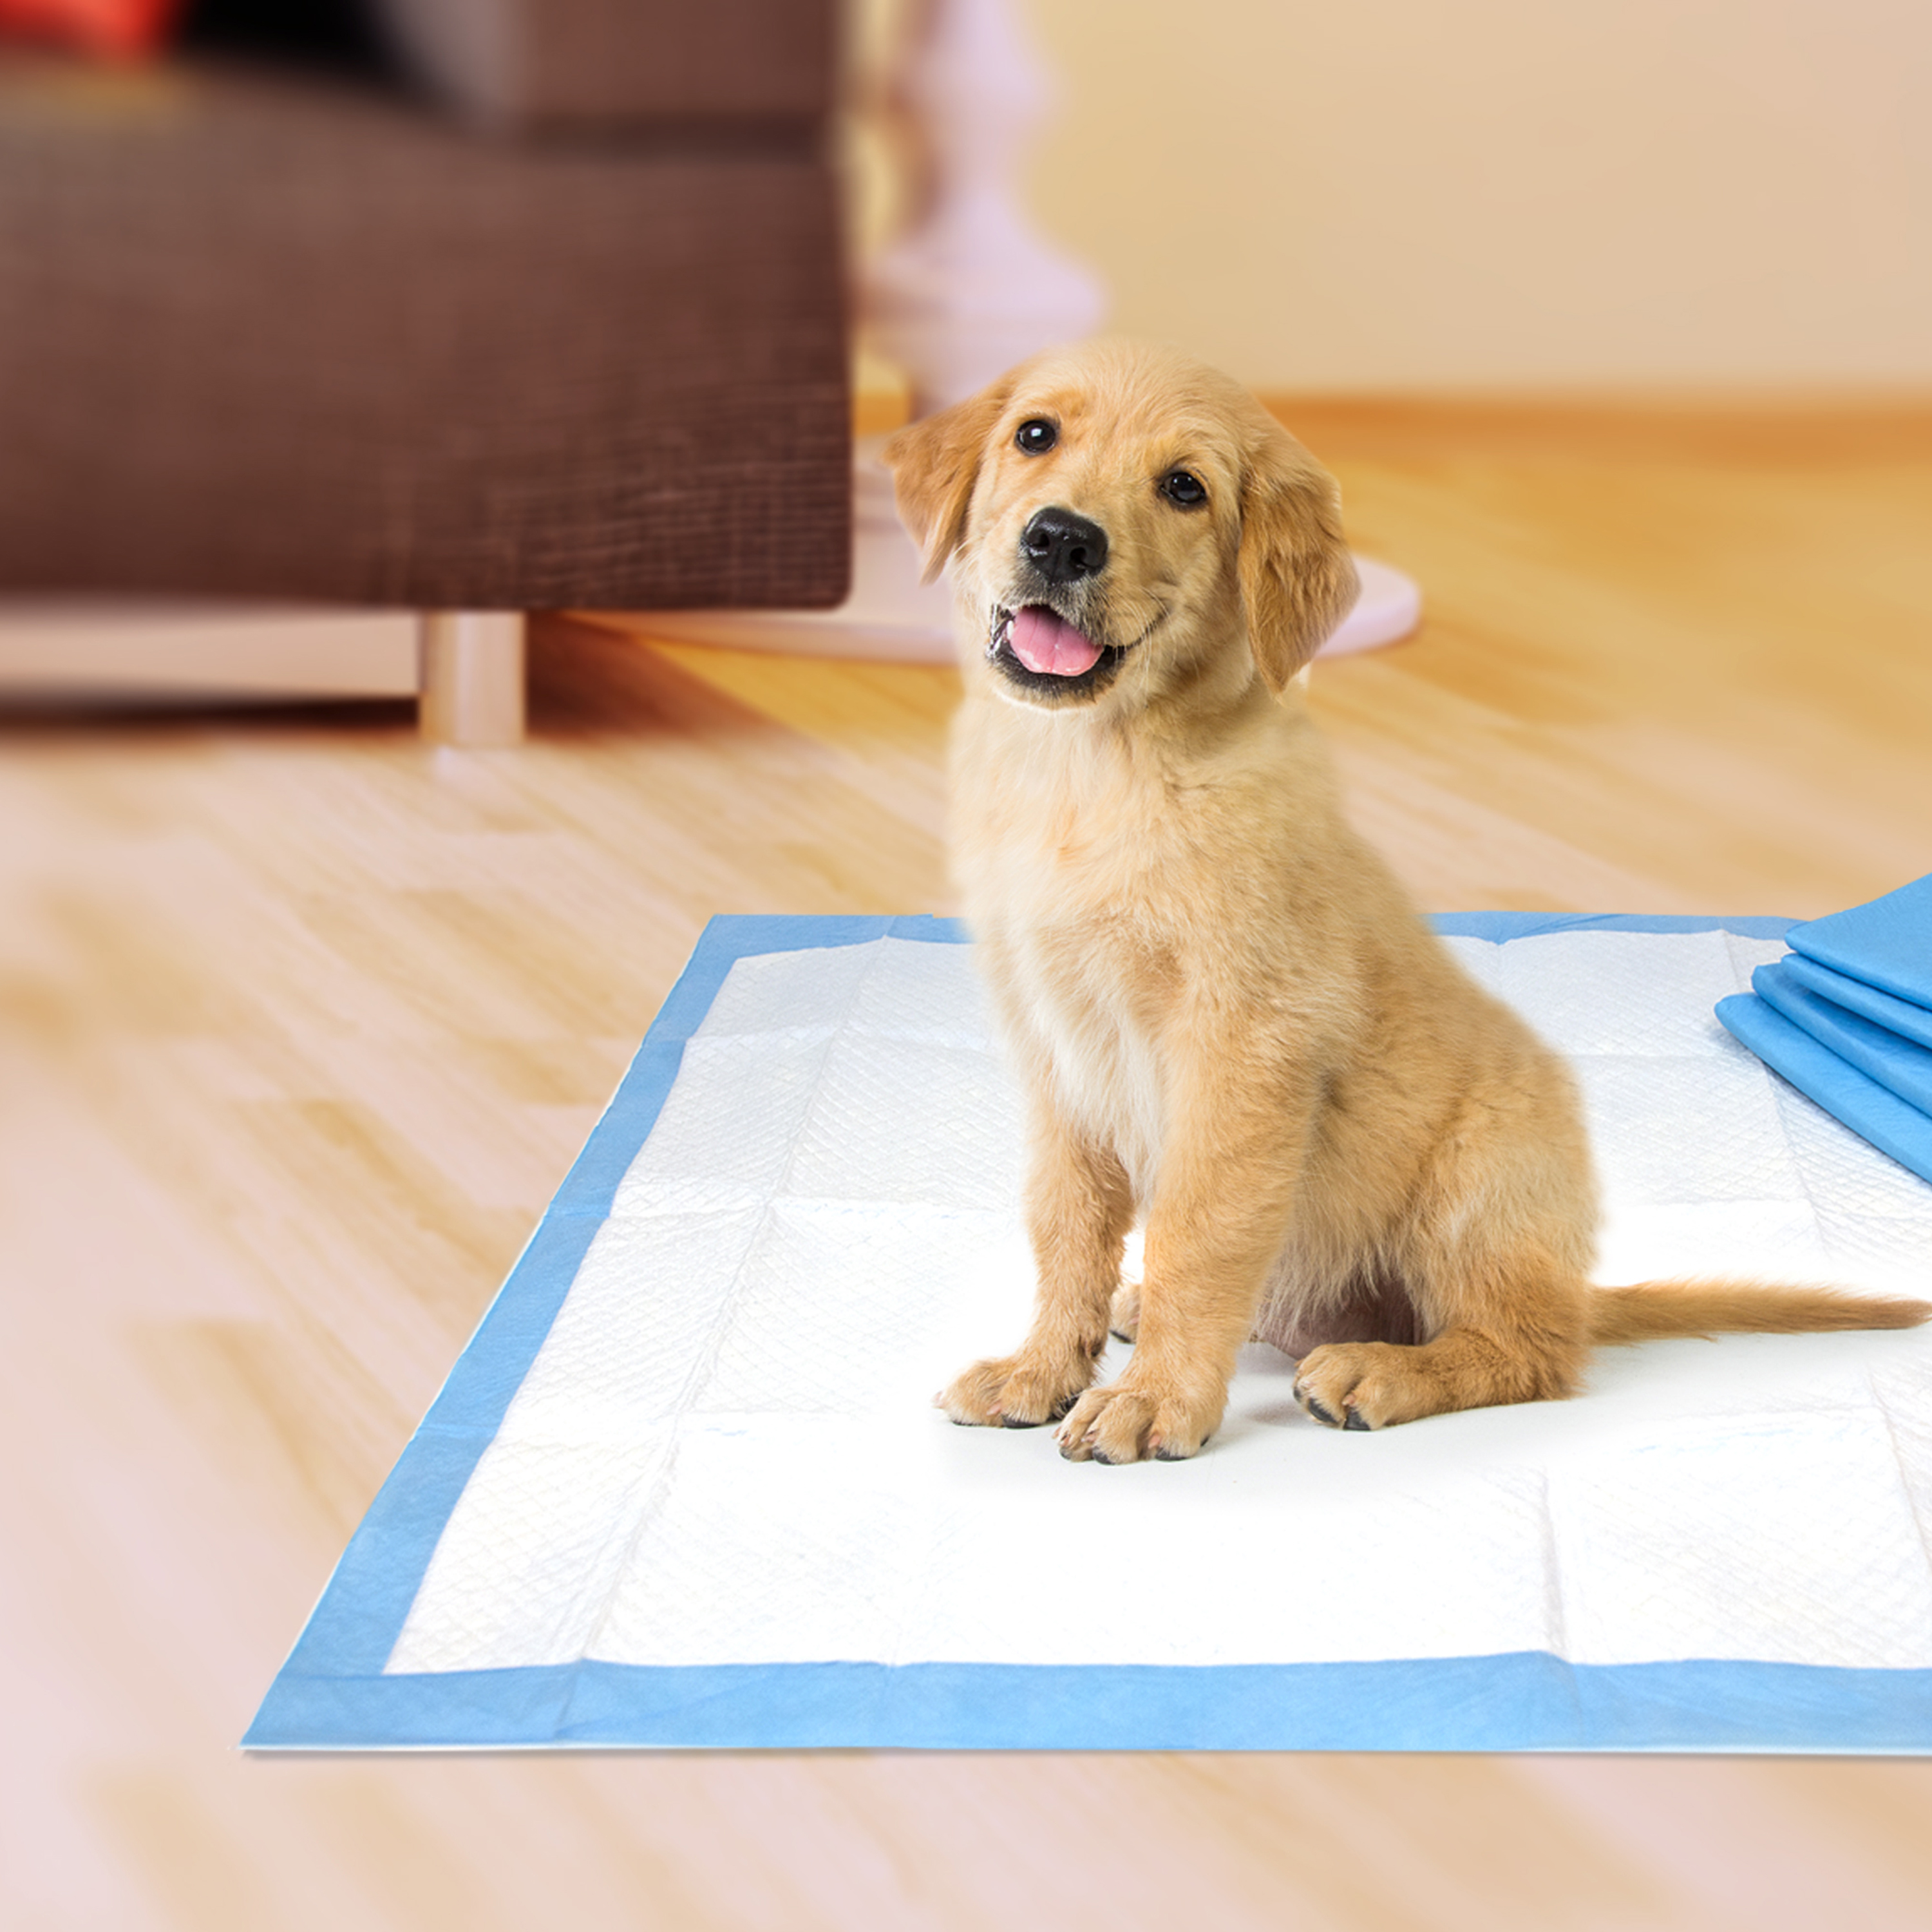 Four Paws Pet Select Pee Pee Pads for Dogs and Puppies 50 Count Standard 22" x 23" - image 5 of 8